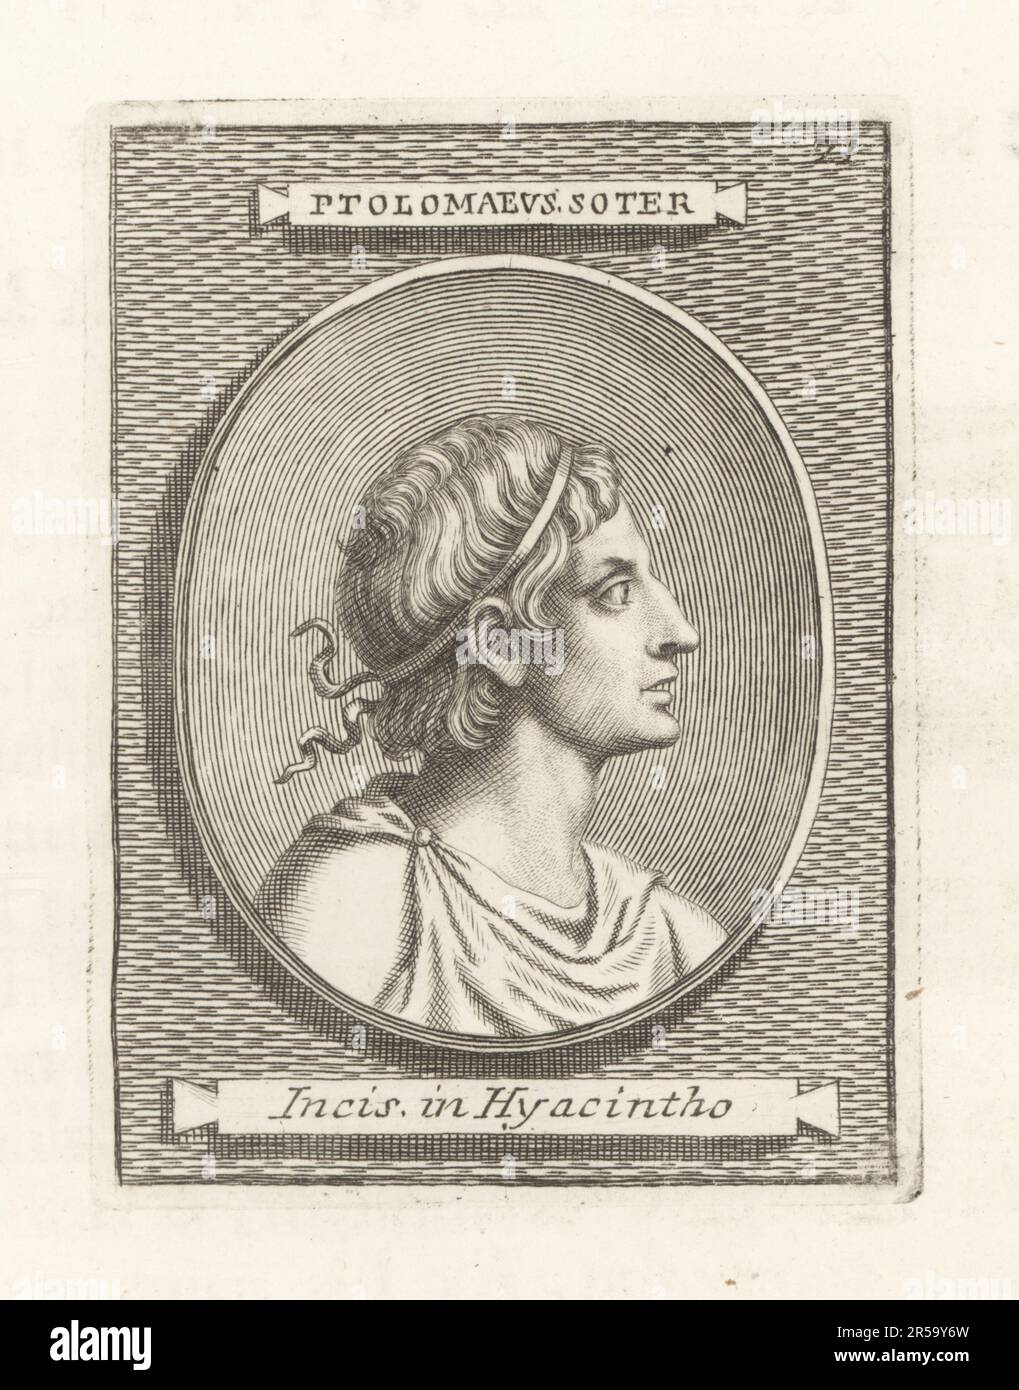 Ptolemy I Soter, Macedonian Greek general and successor to Alexander the Great, c.367-282 BC. Founder of the Ptolemaic dynasty in Egypt. Engraved gem in jacinth. Ptolomaeus Soter Incis in Hyacintho. Copperplate engraving from Francesco Valesio, Antonio Gori and Ridolfino Venuti’s Academia Etrusca, Museum Cortonense in quo Vetera Monumenta, (Etruscan Academy or Museum of Cortona), Faustus Amideus, Rome, 1750. Stock Photo